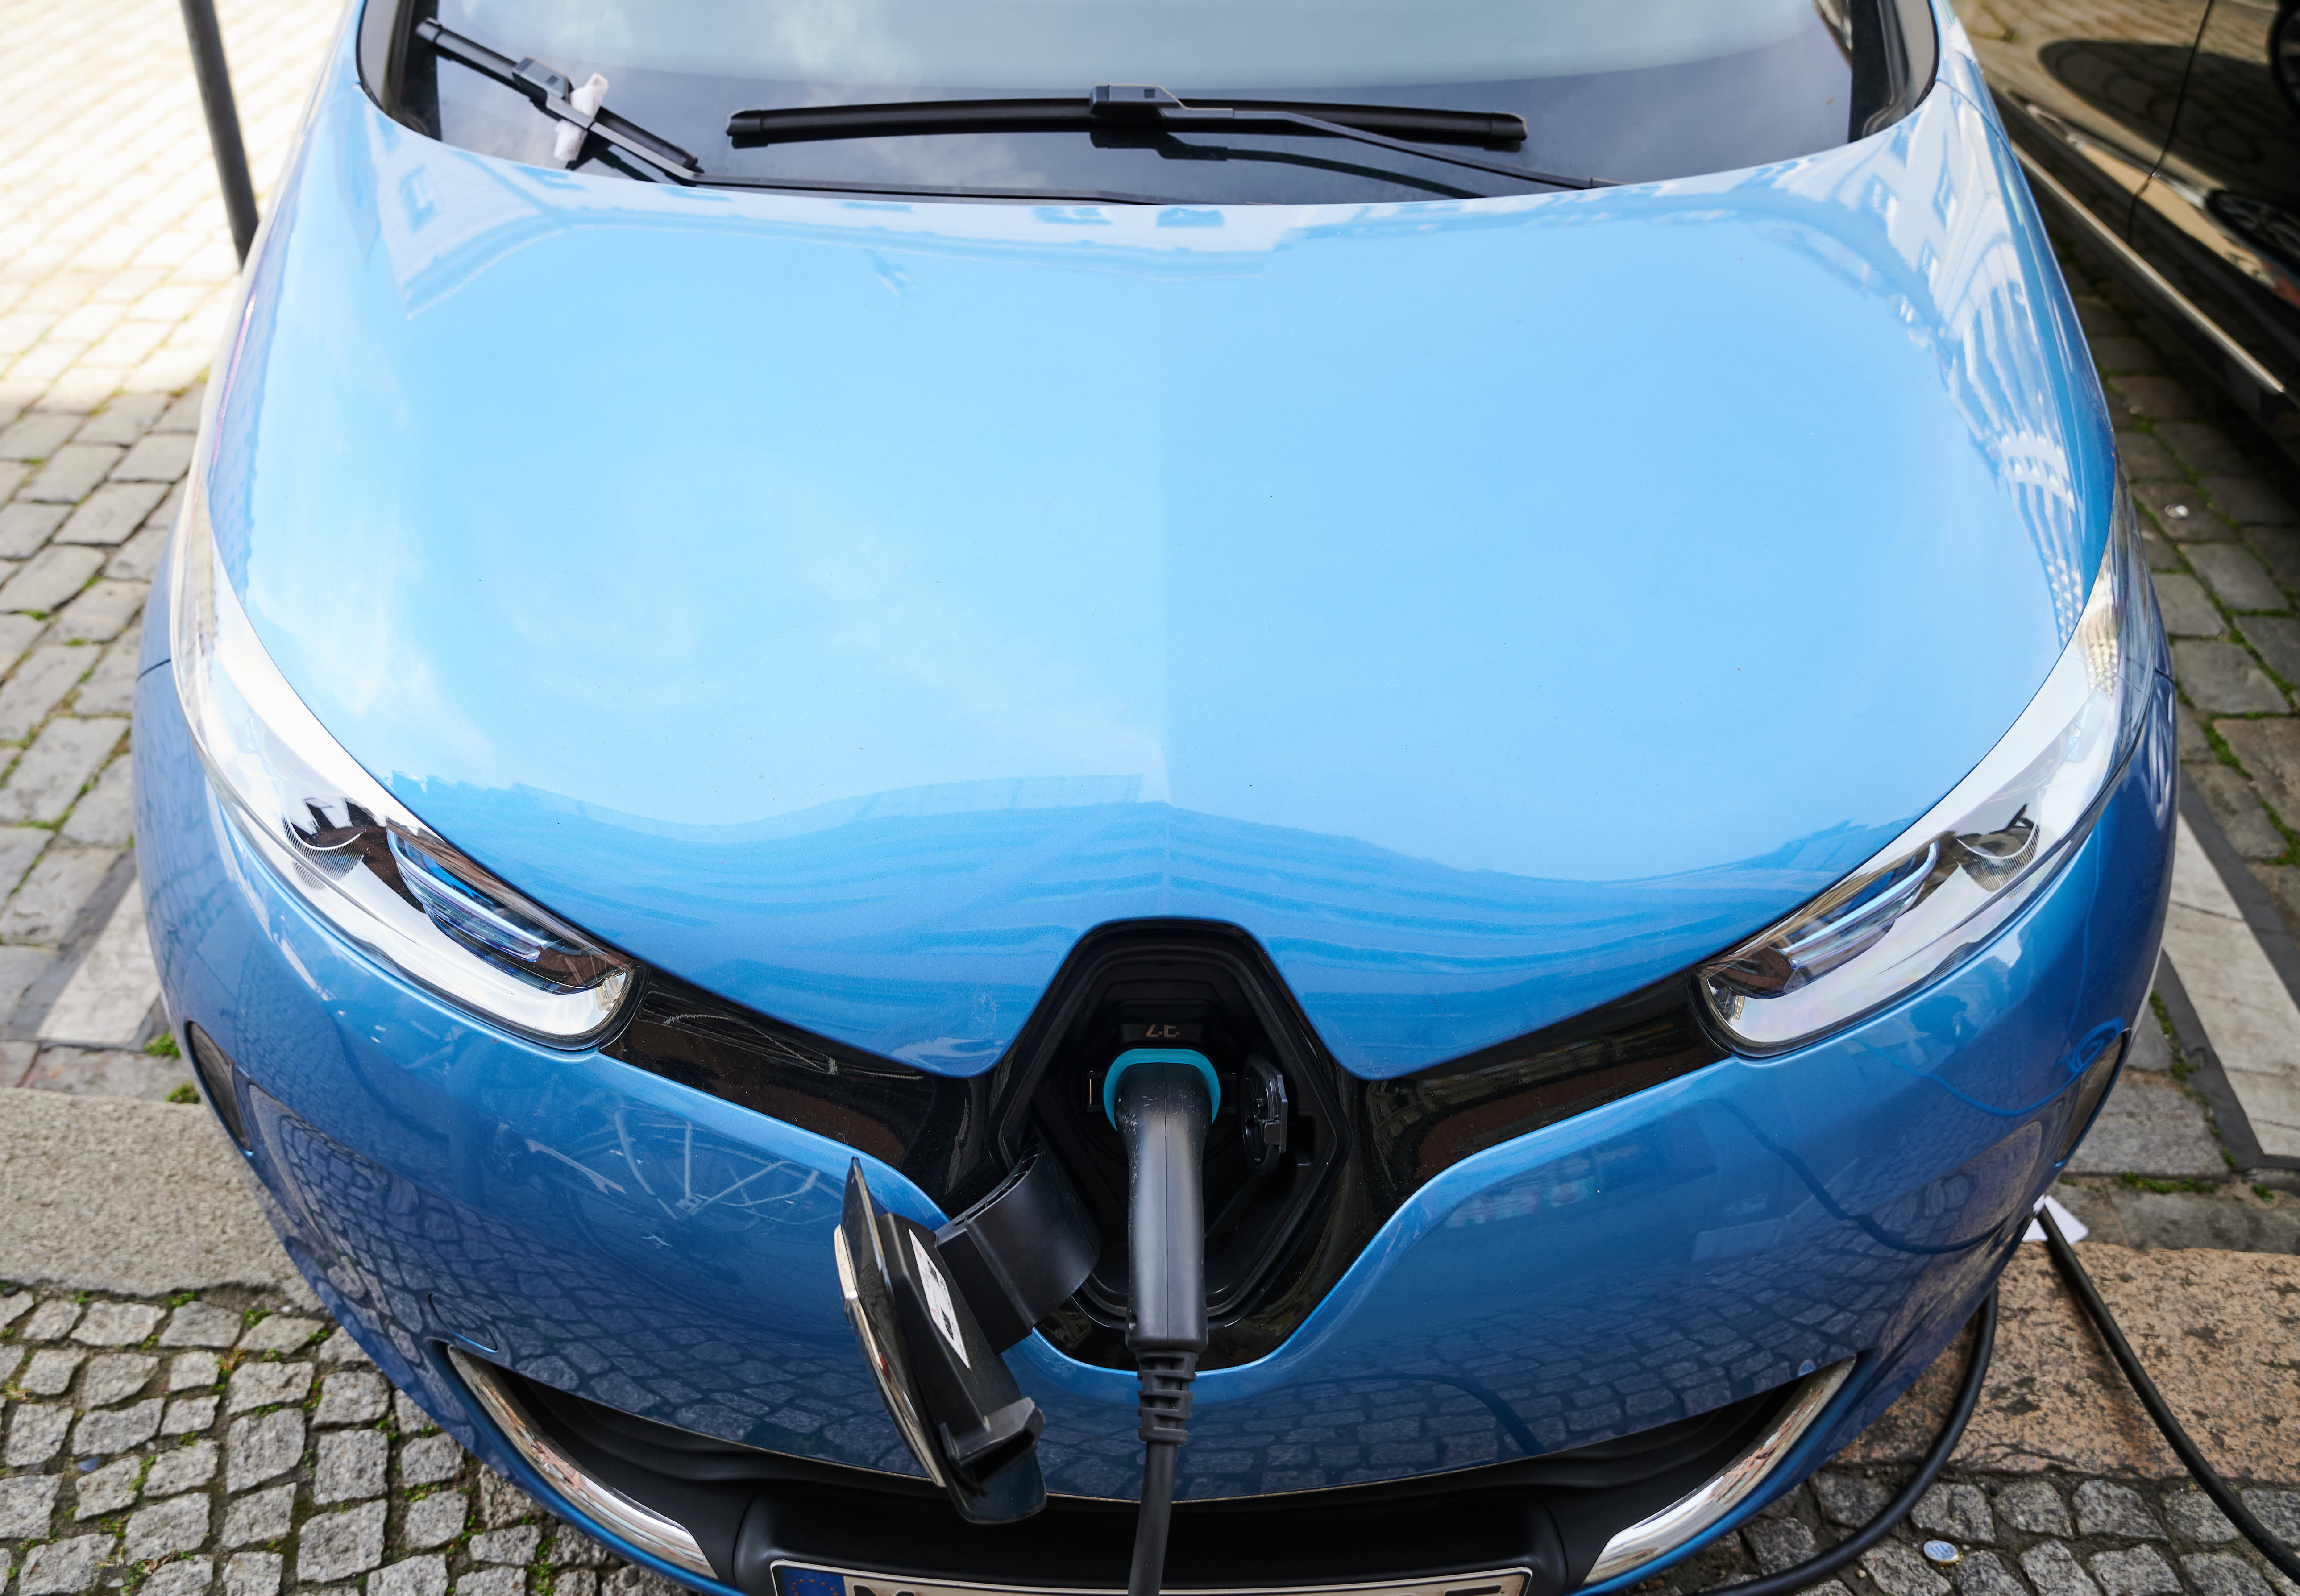 Renault inks gigafactory deals with Chinese and French firms